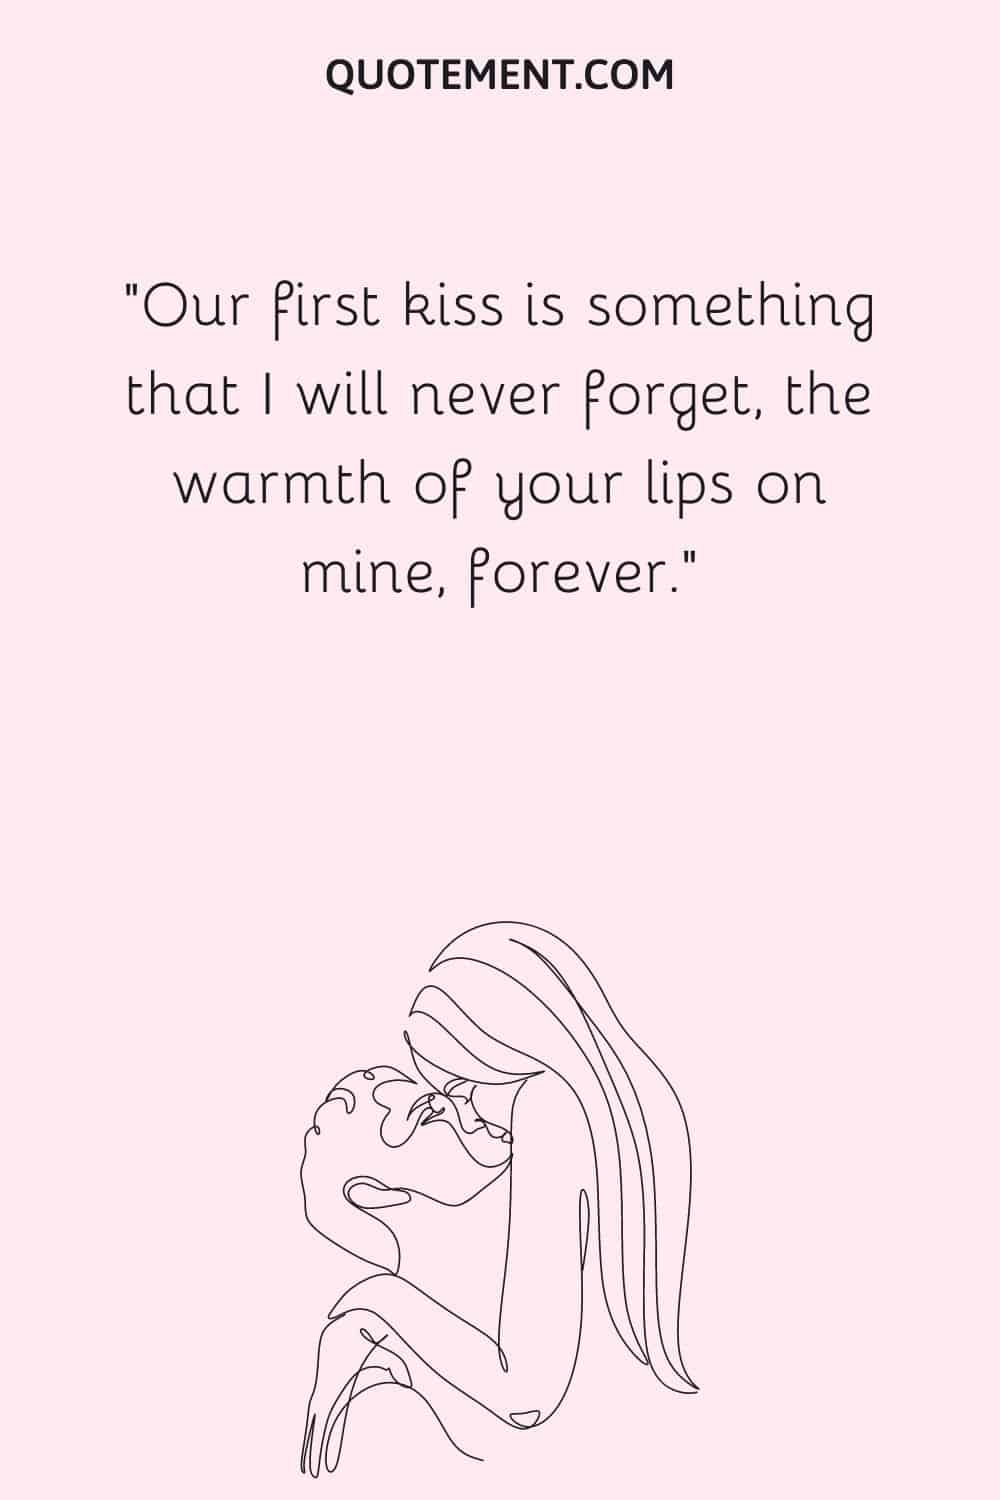 Our first kiss is something that I will never forget, the warmth of your lips on mine, forever.